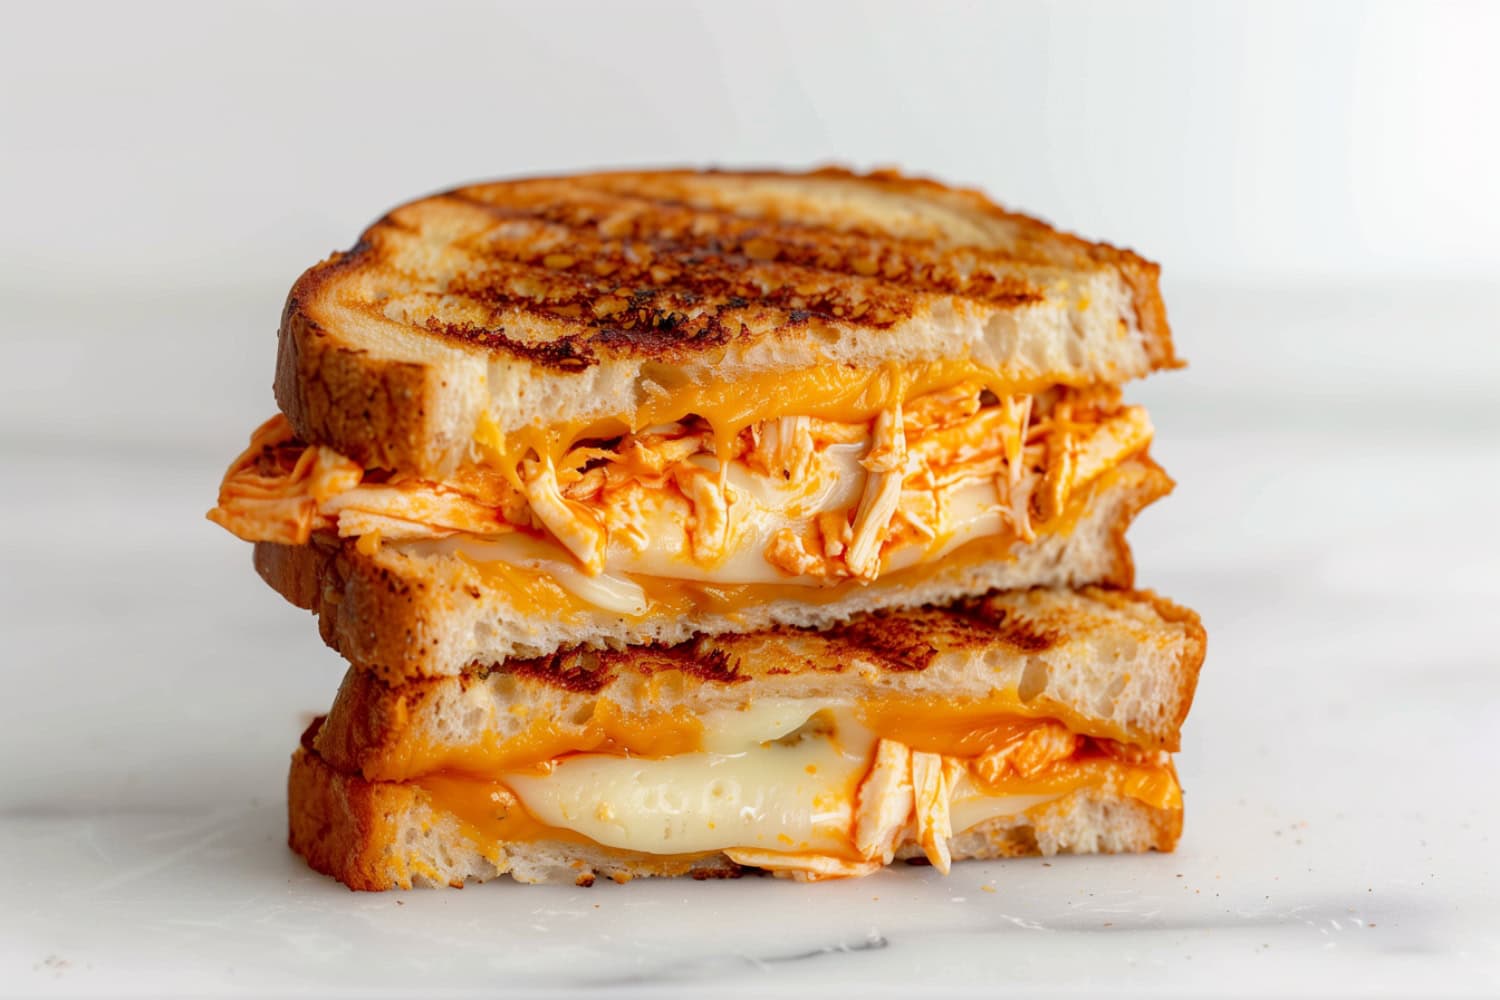 A closeup photo of a grilled cheese sandwich with buffalo chicken, sitting on top of each other and cut in half to show the filling.